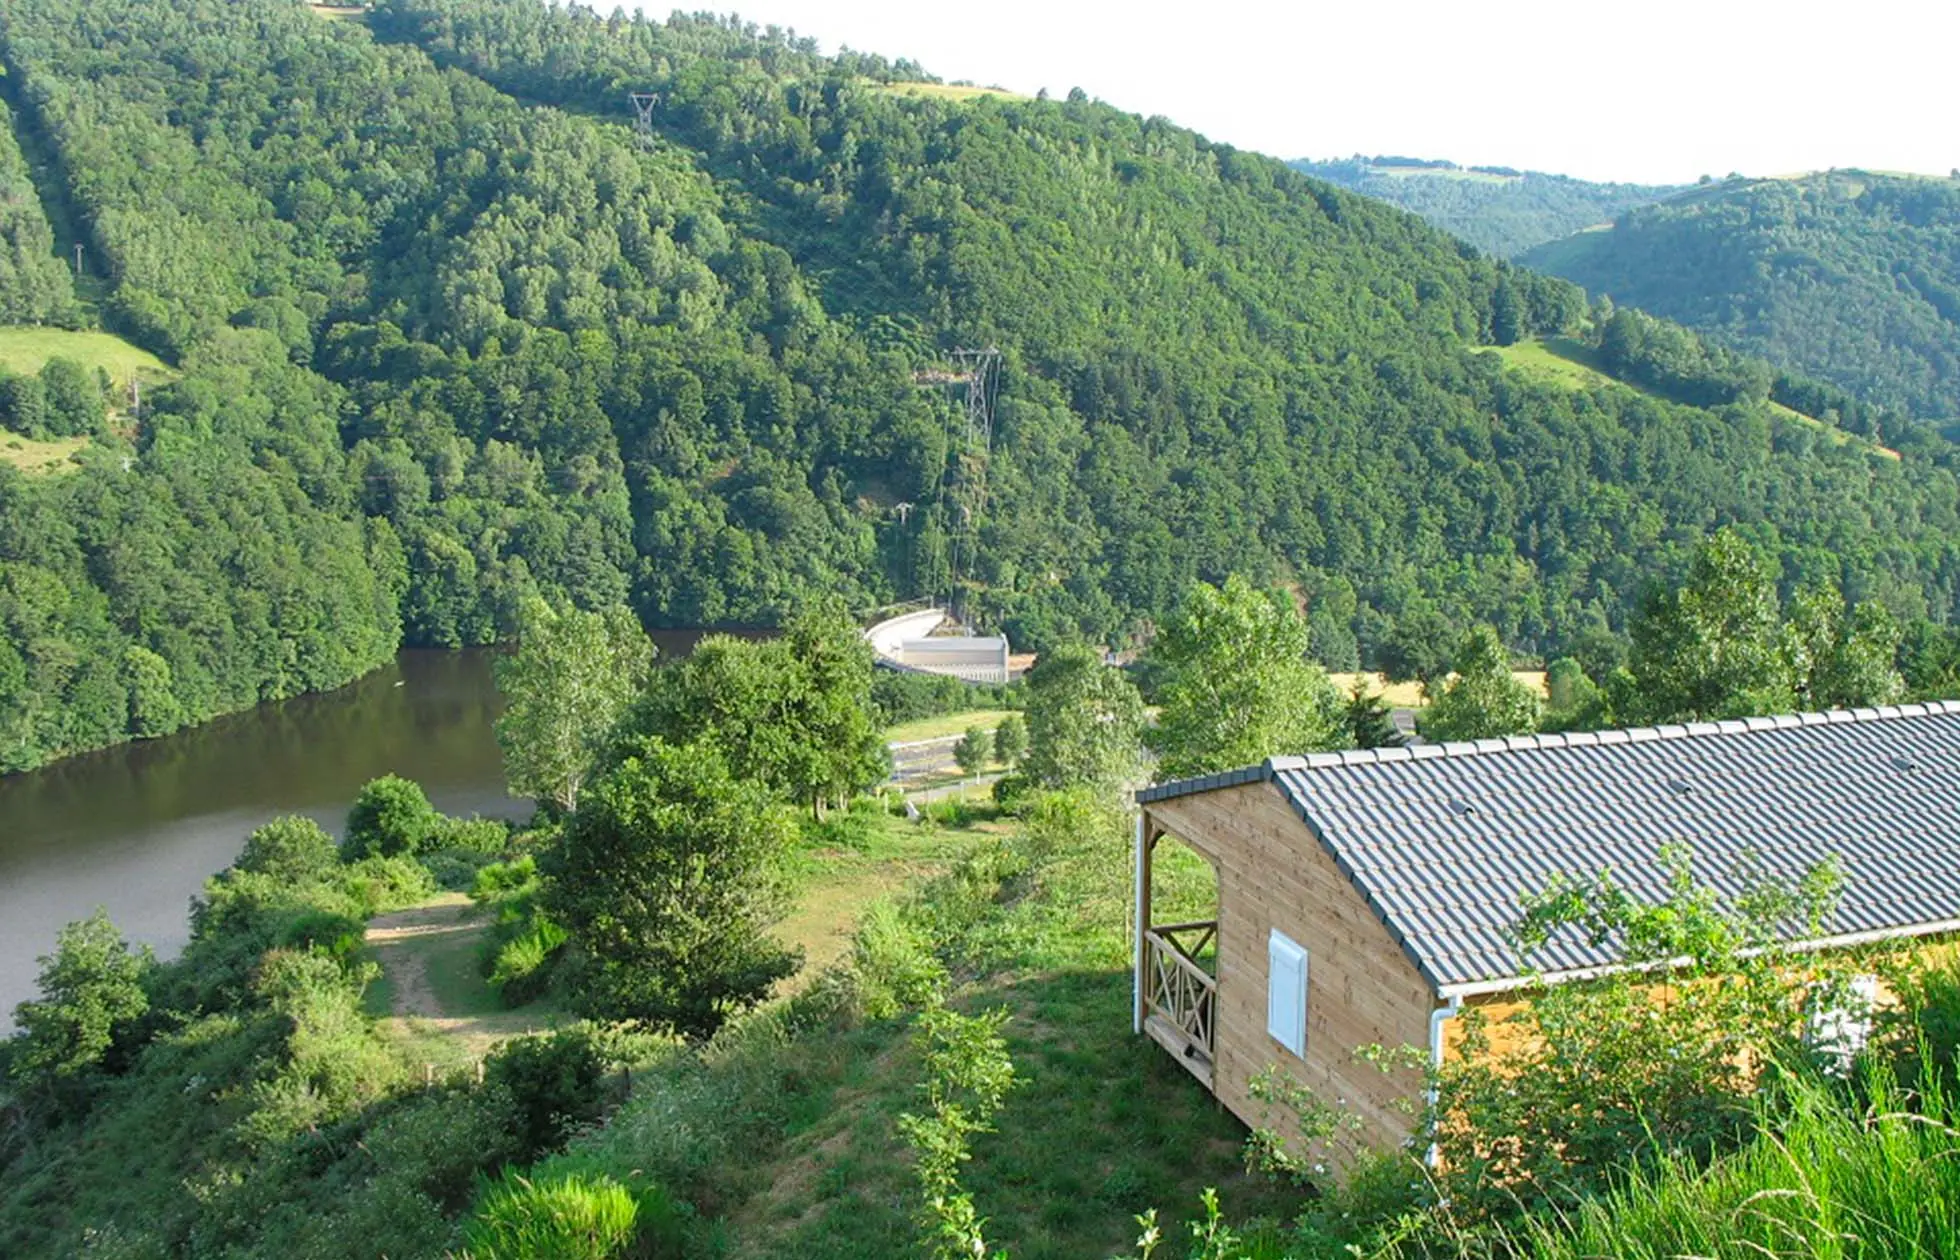 offer ' - '03 - Camping Le Belvédère - Situation